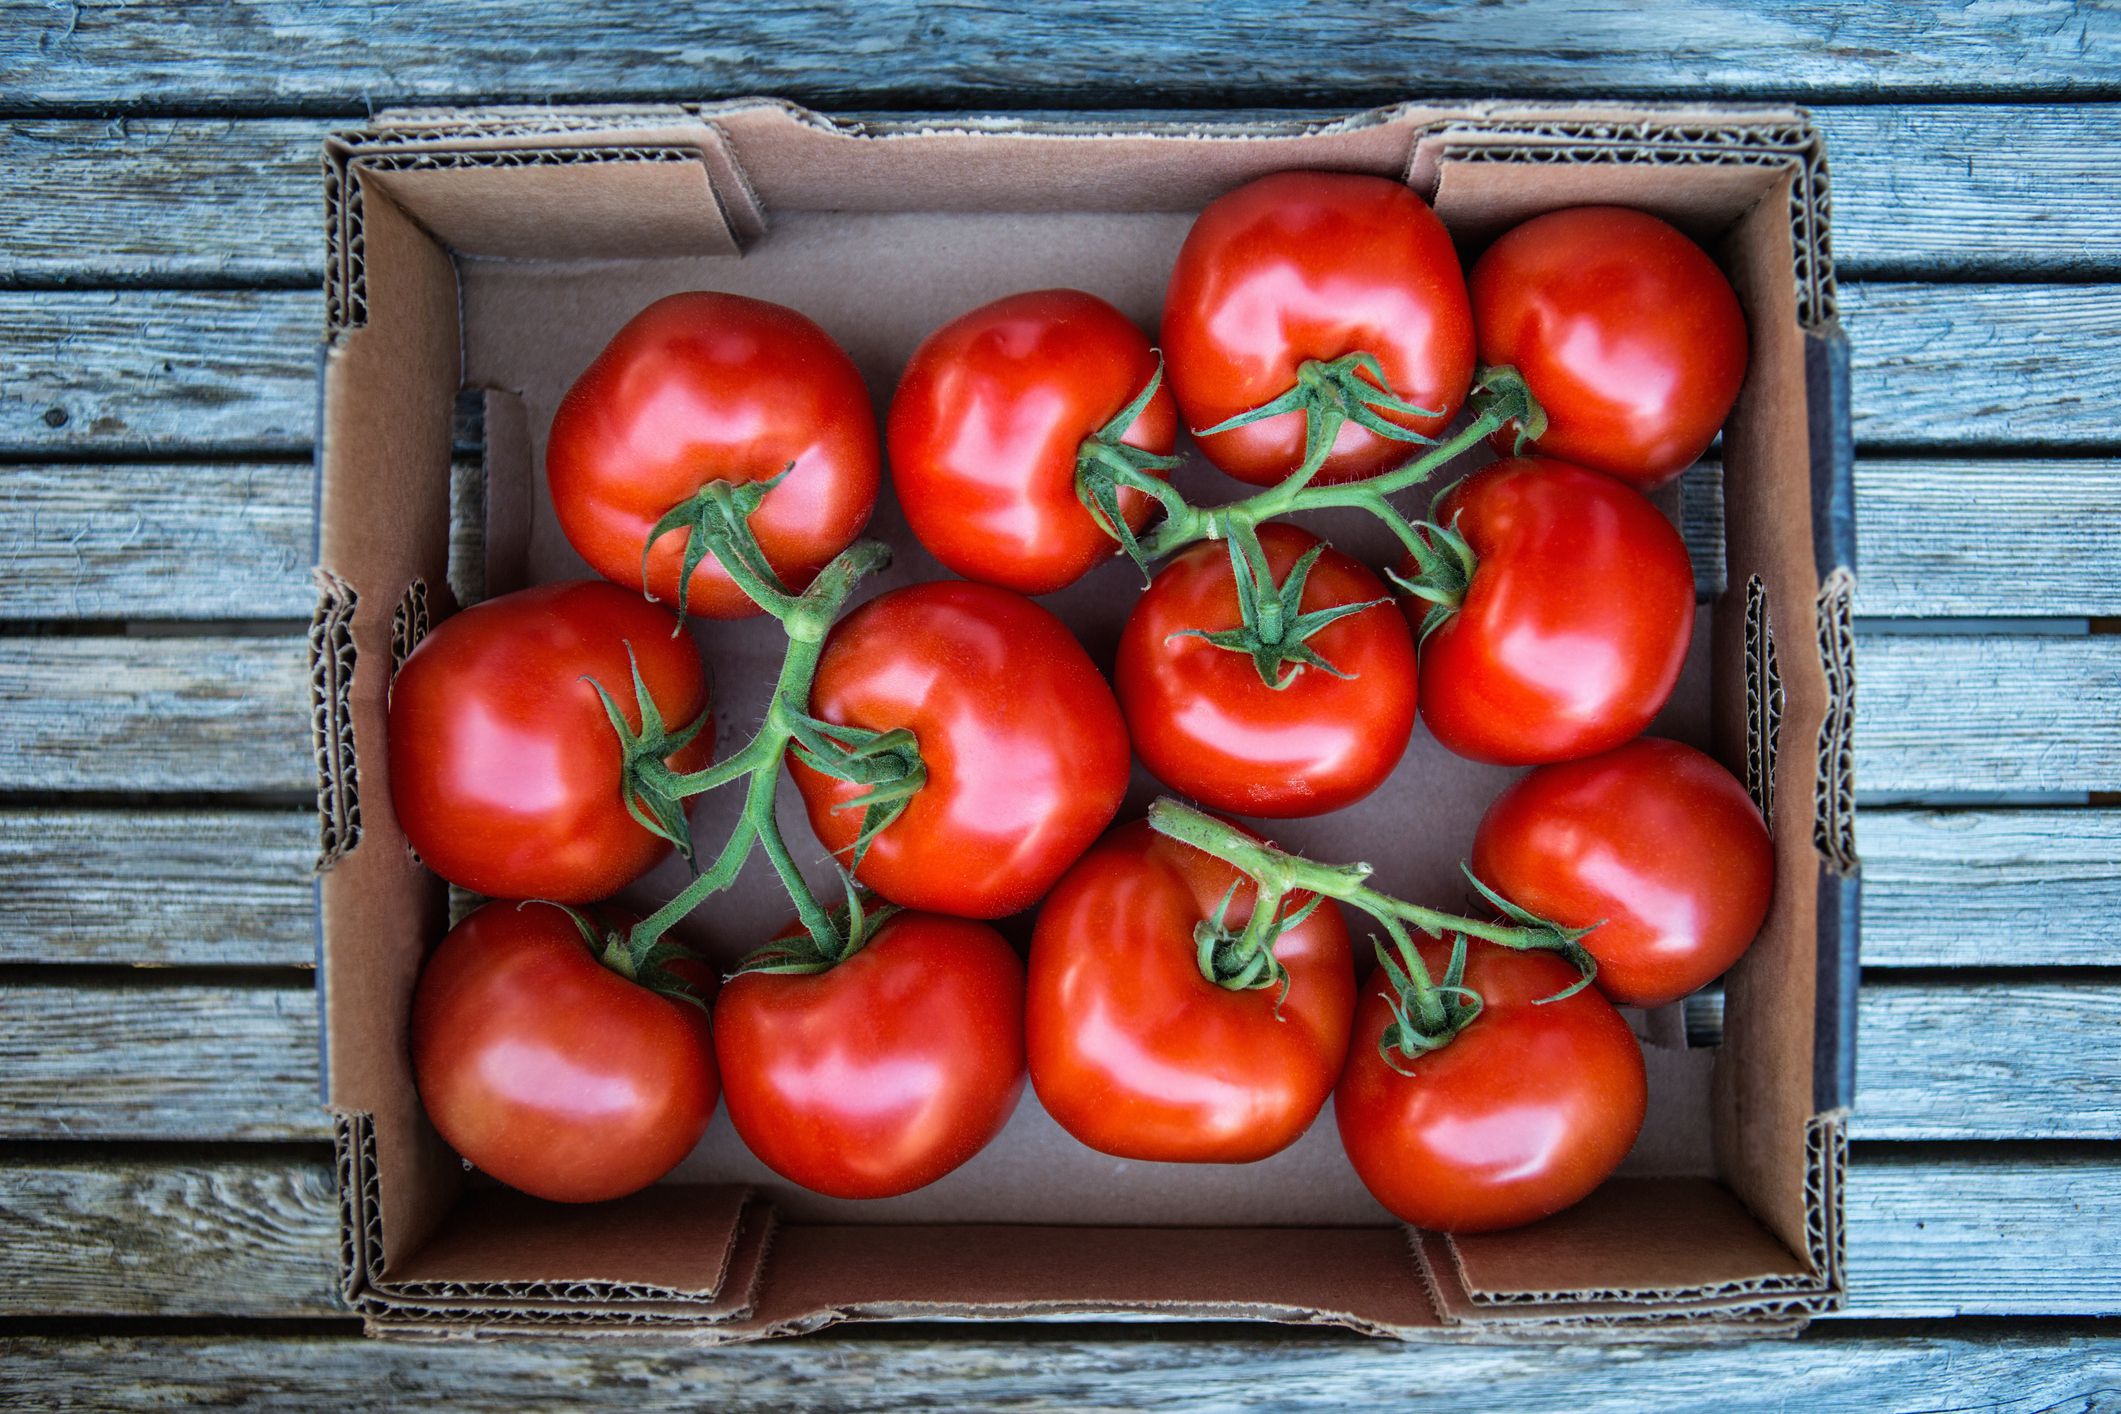 How to Preserve Your Ripe, Juicy Summer Tomatoes